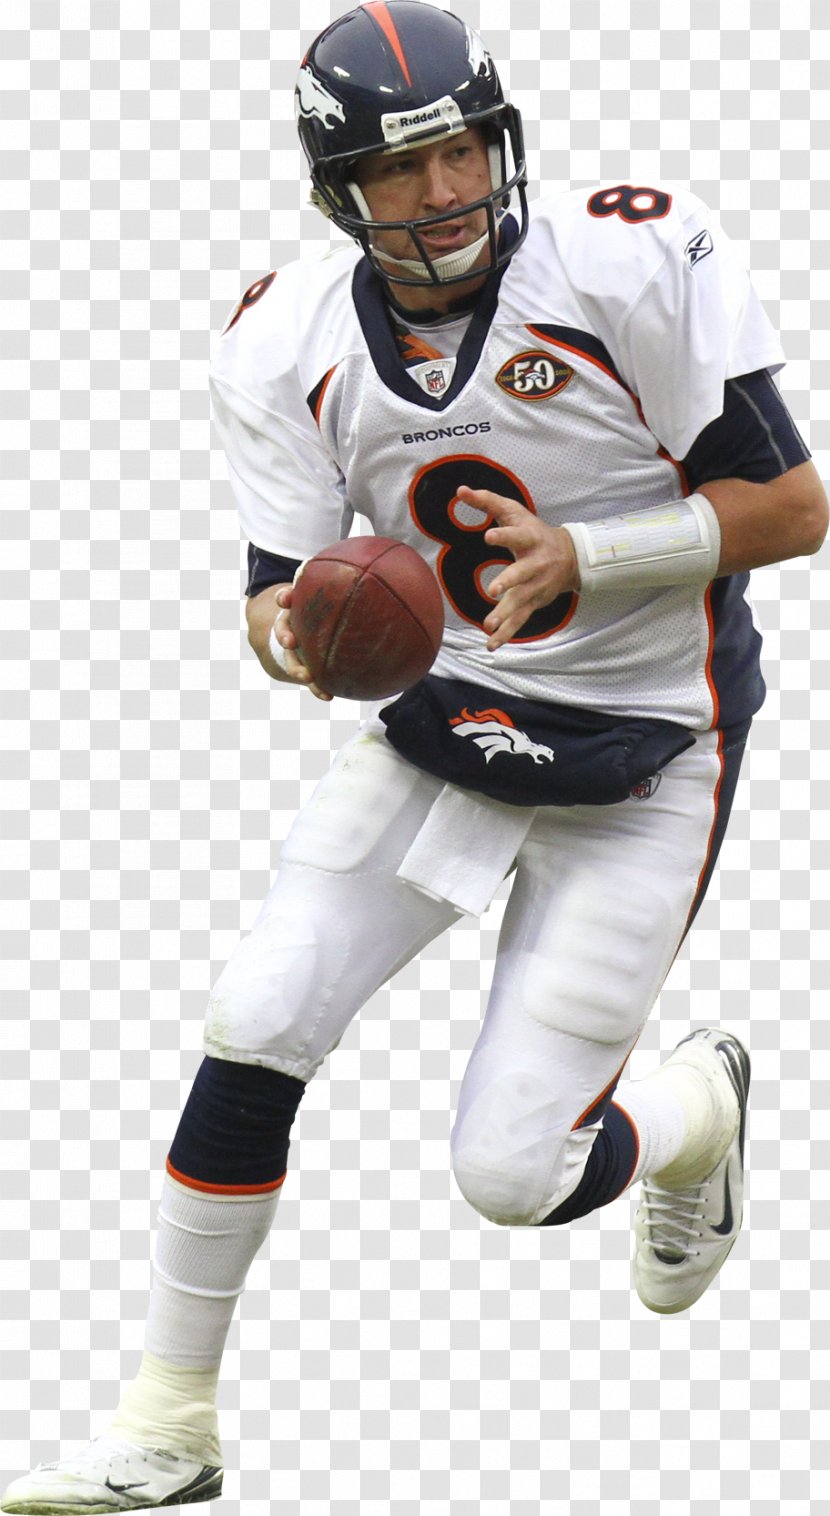 American Football Helmets Team ユニフォーム - Protective Gear In Sports Transparent PNG